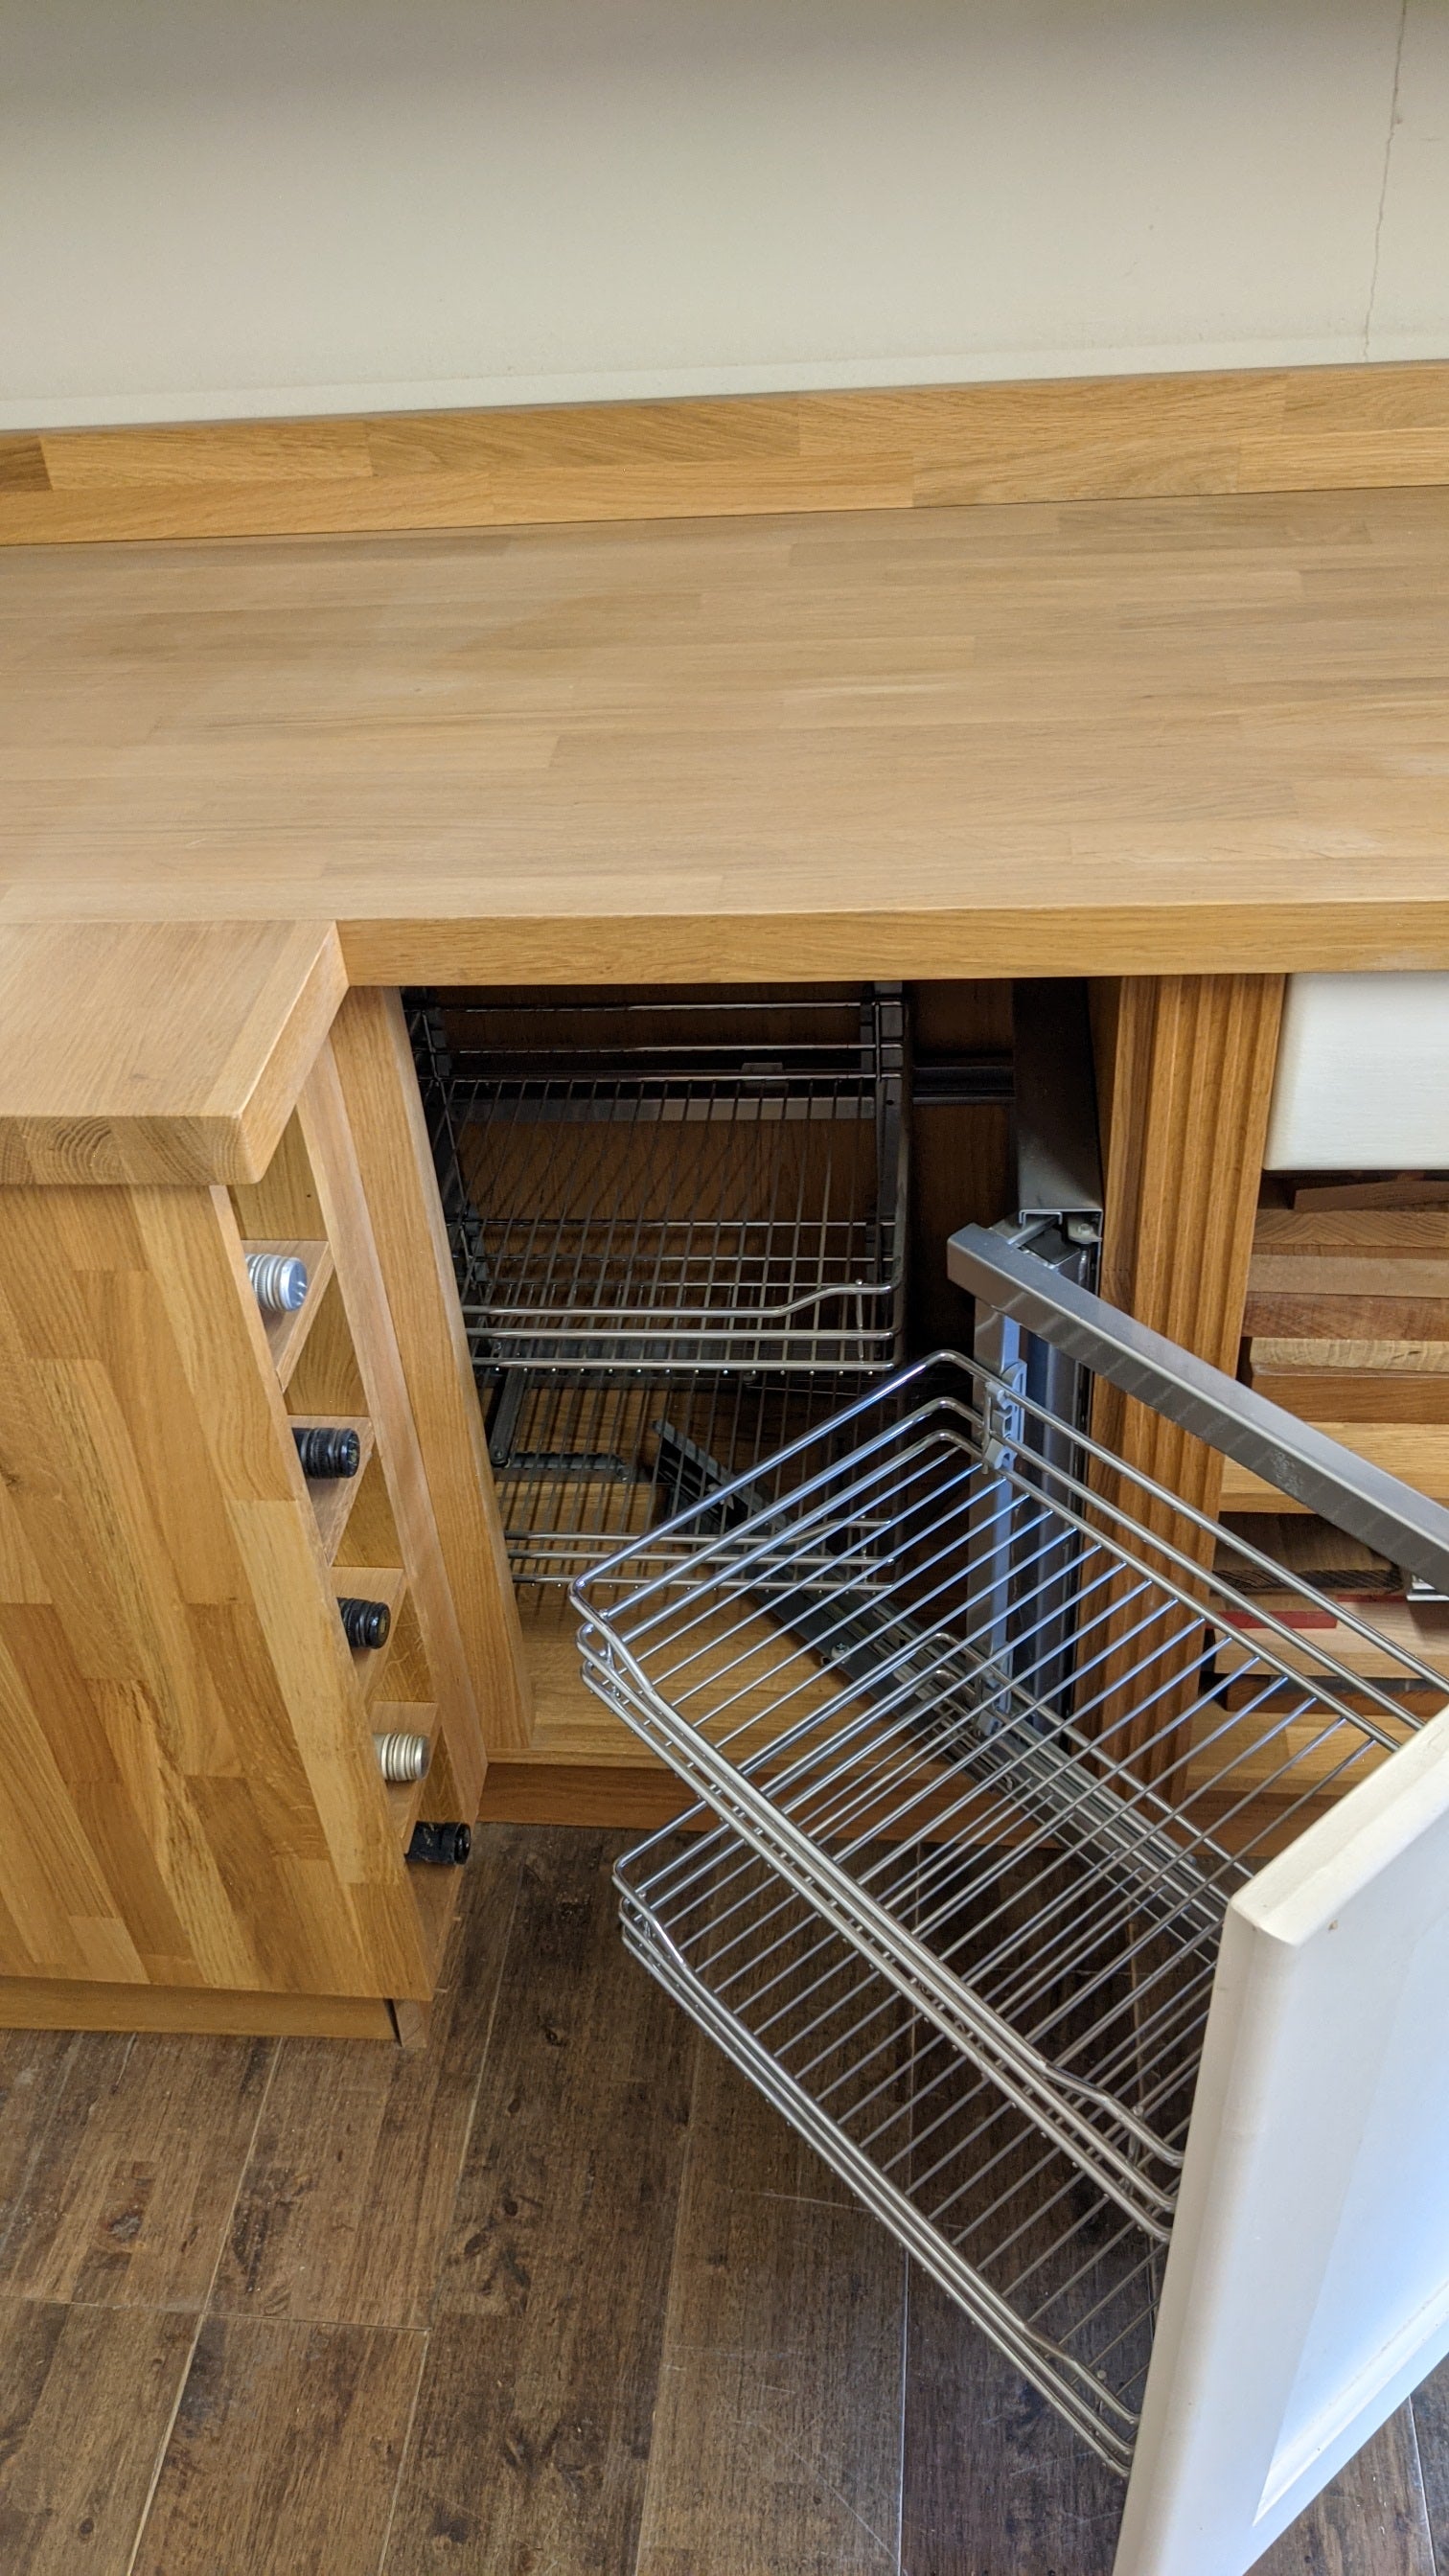 Solid Oak Kitchen with Shaker Style Doors and Metal Wirework Mechanisms